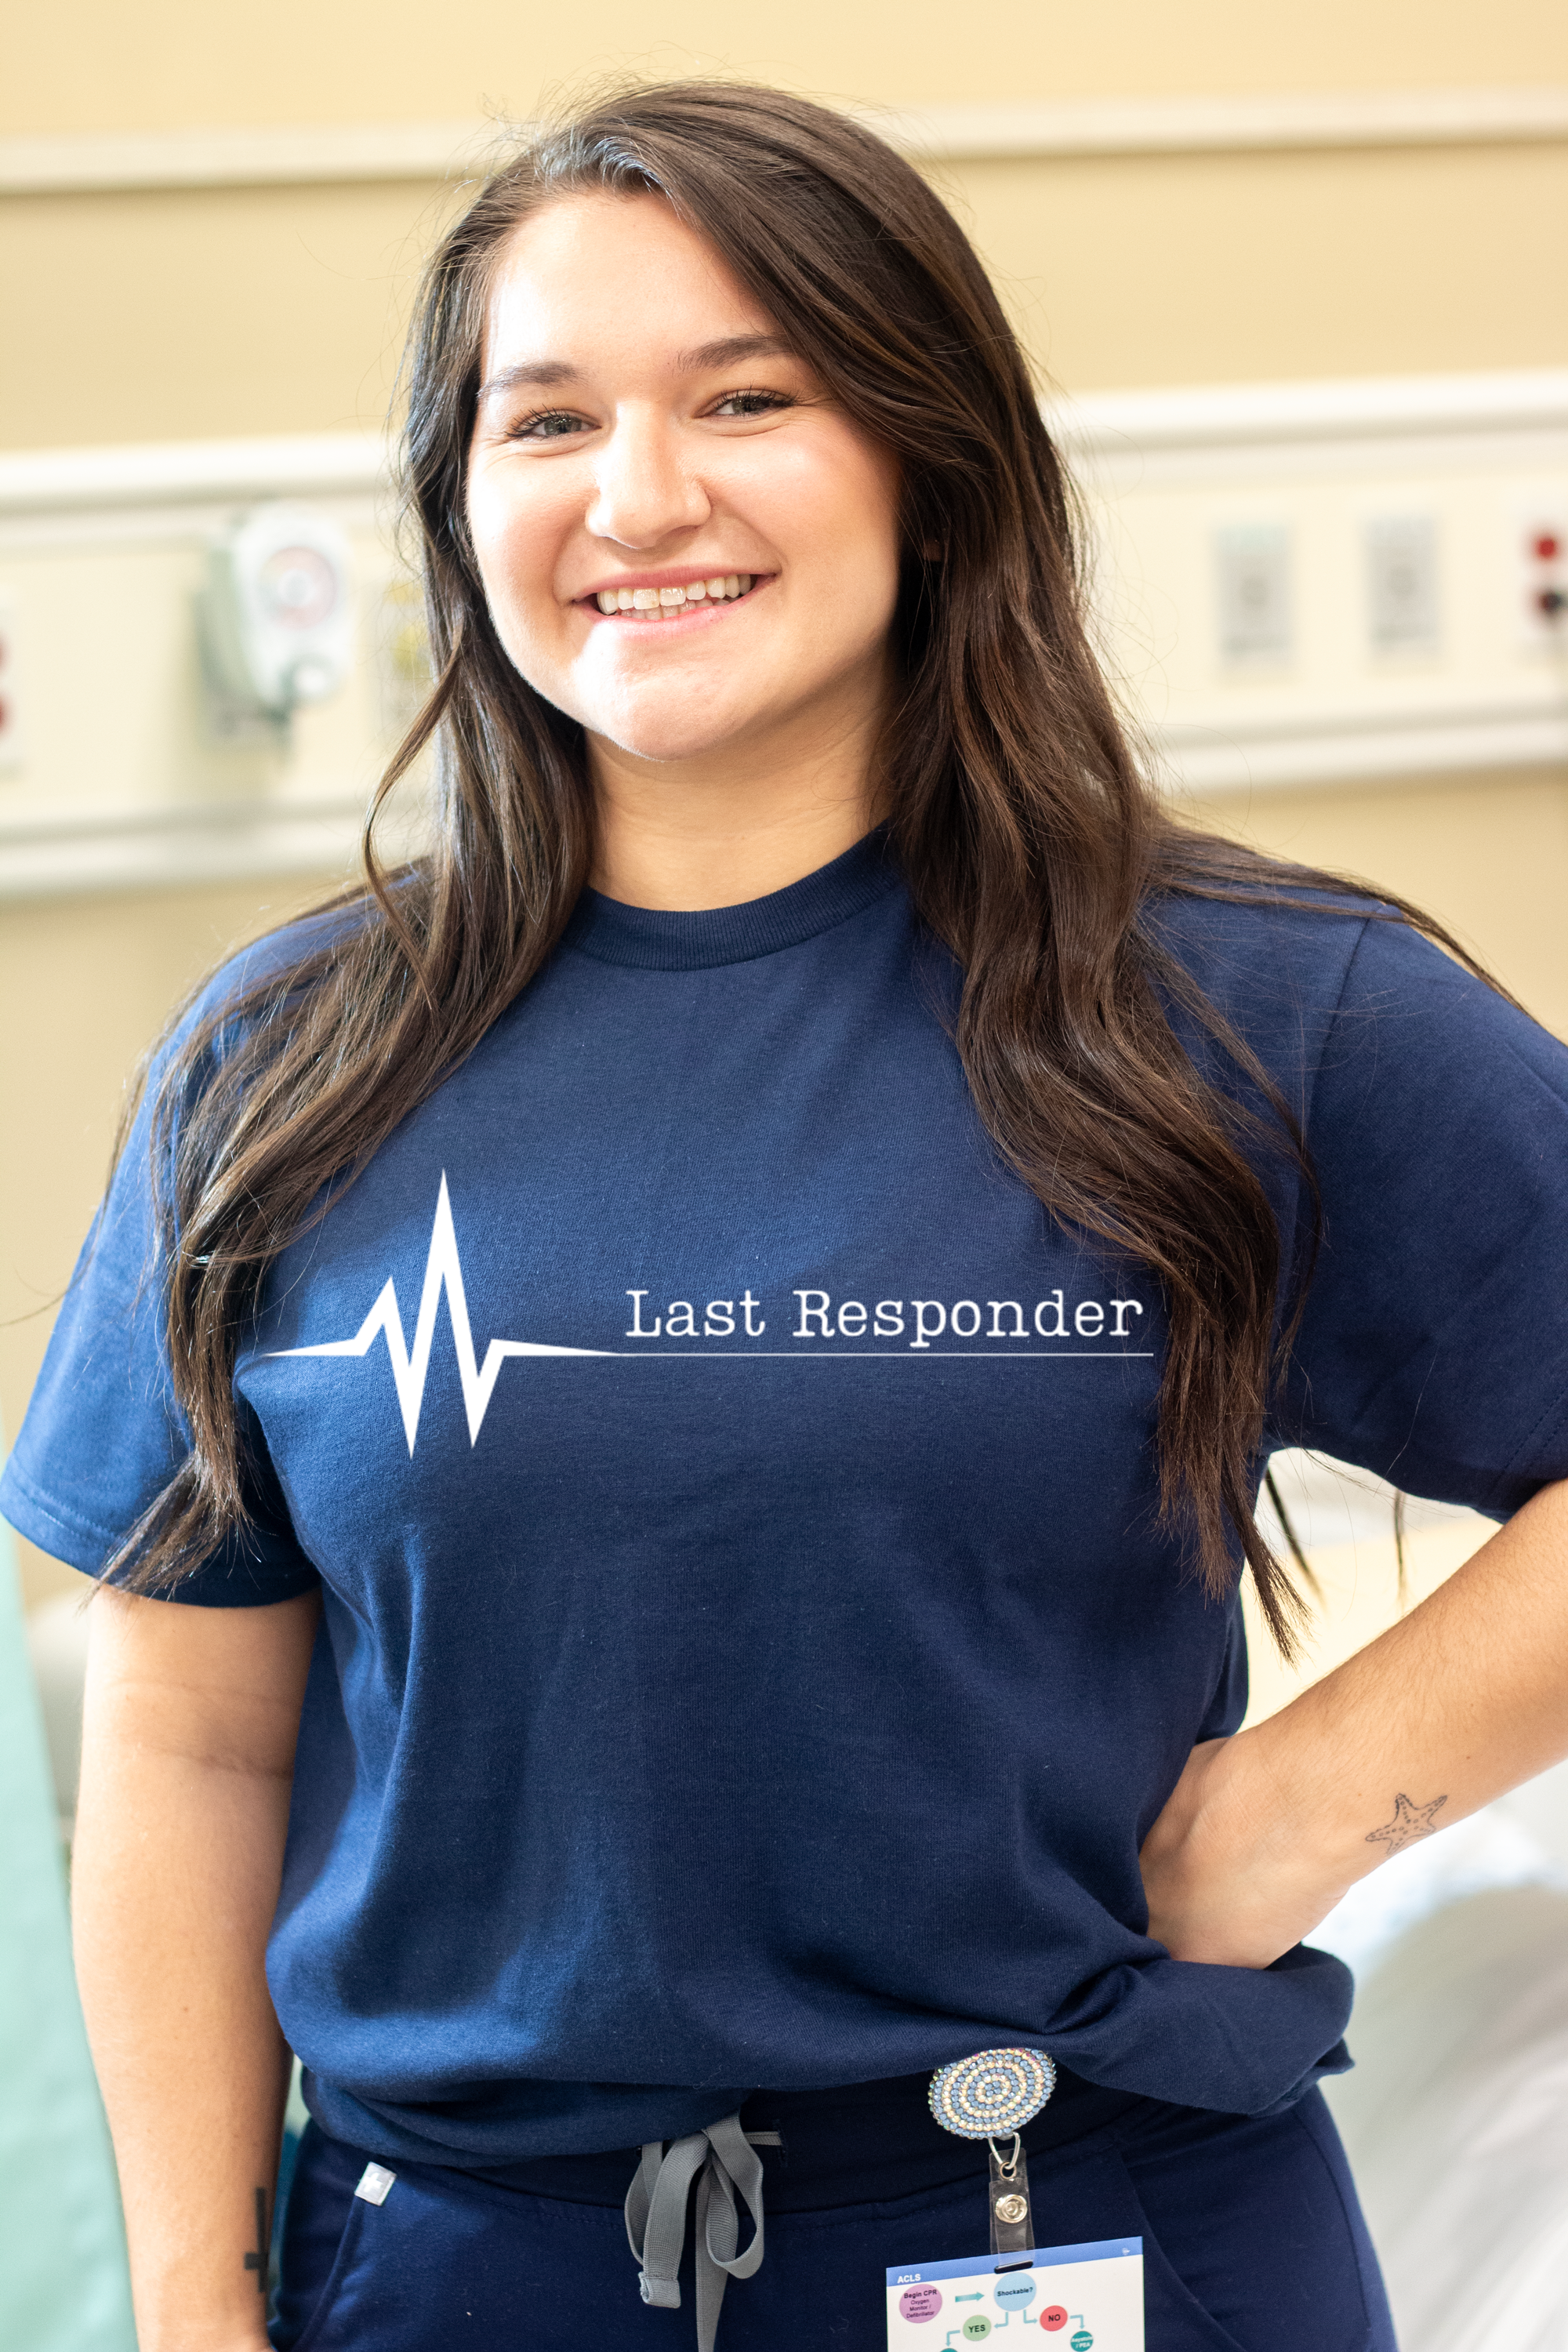 Our Last Responder T-Shirt for Hopsice Nurses is a great t-shirt with a logo on the front.  It's simple design makes a powerful statement.  It is a dry blend t-shirt with short sleeves.  It is available in black, white and blue.